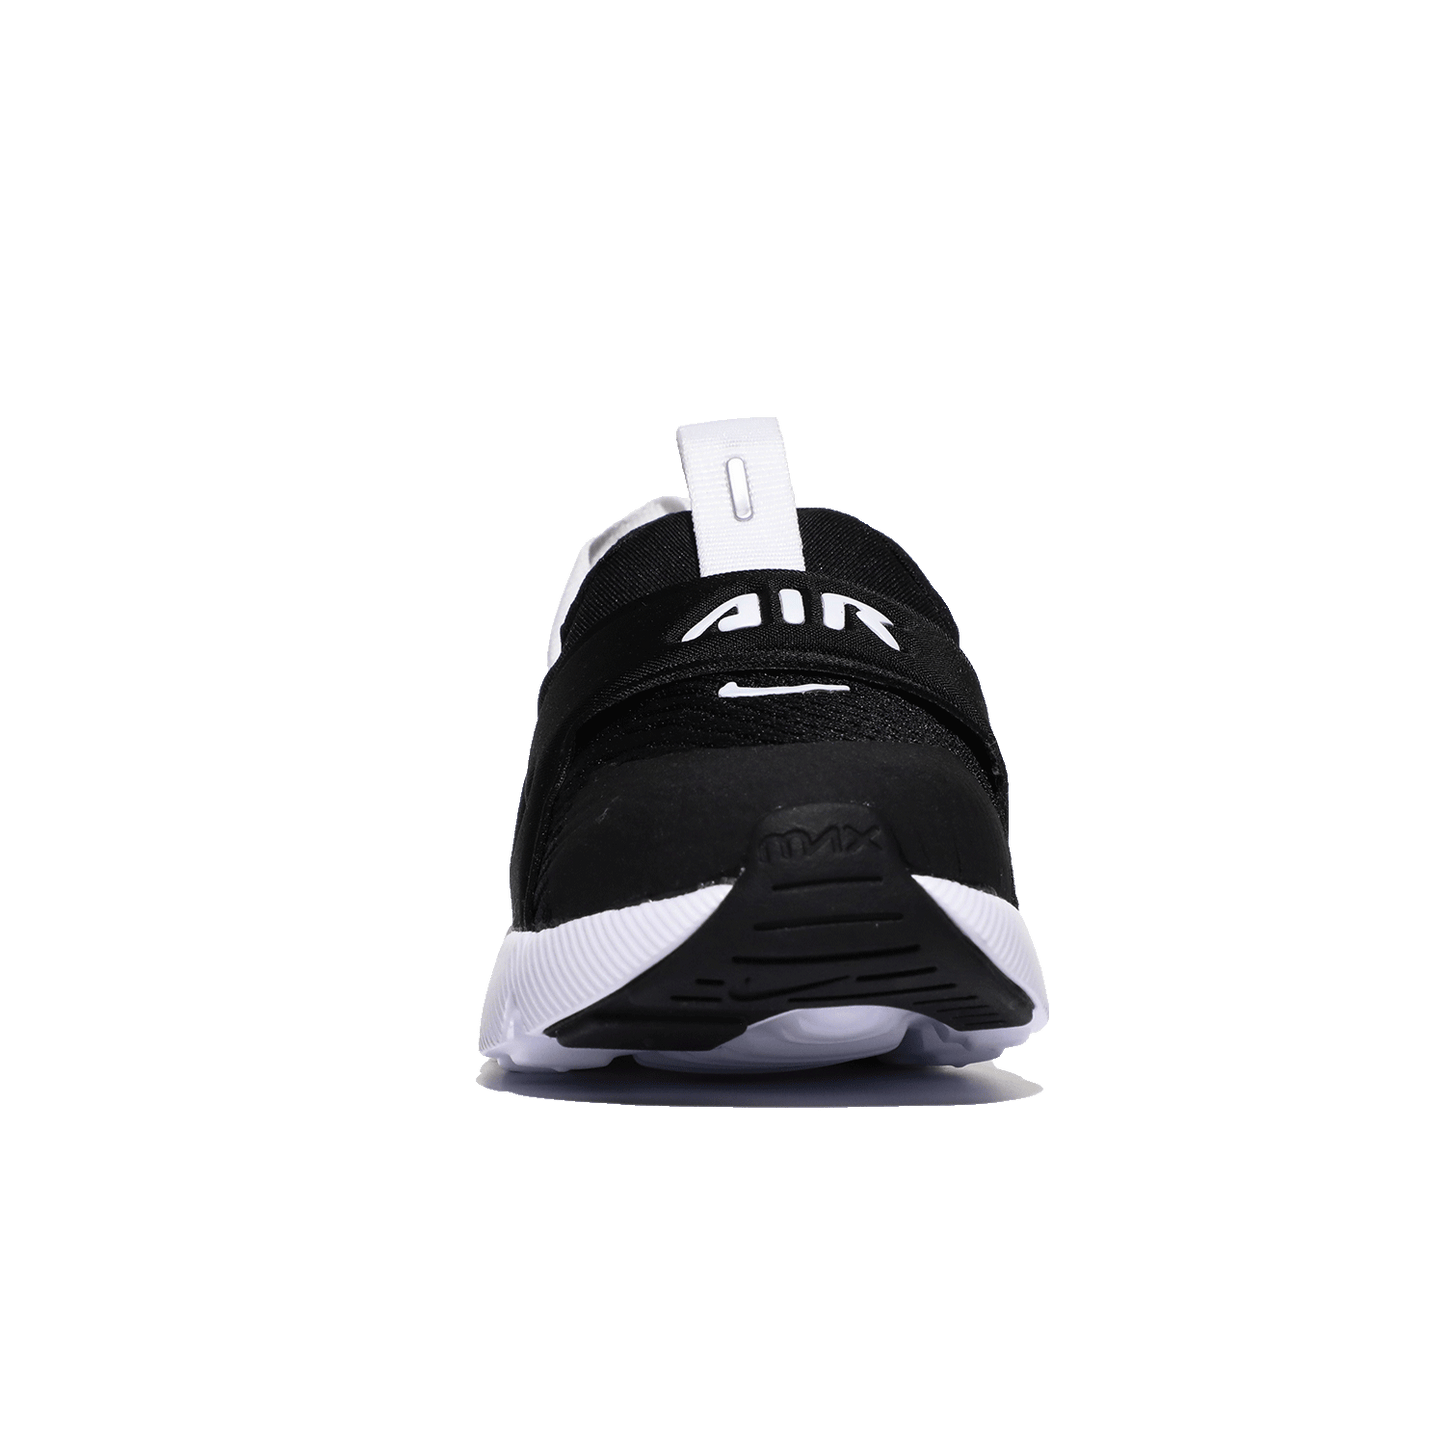 Image 4 of Air Max 270 Extreme (Infant/Toddler)